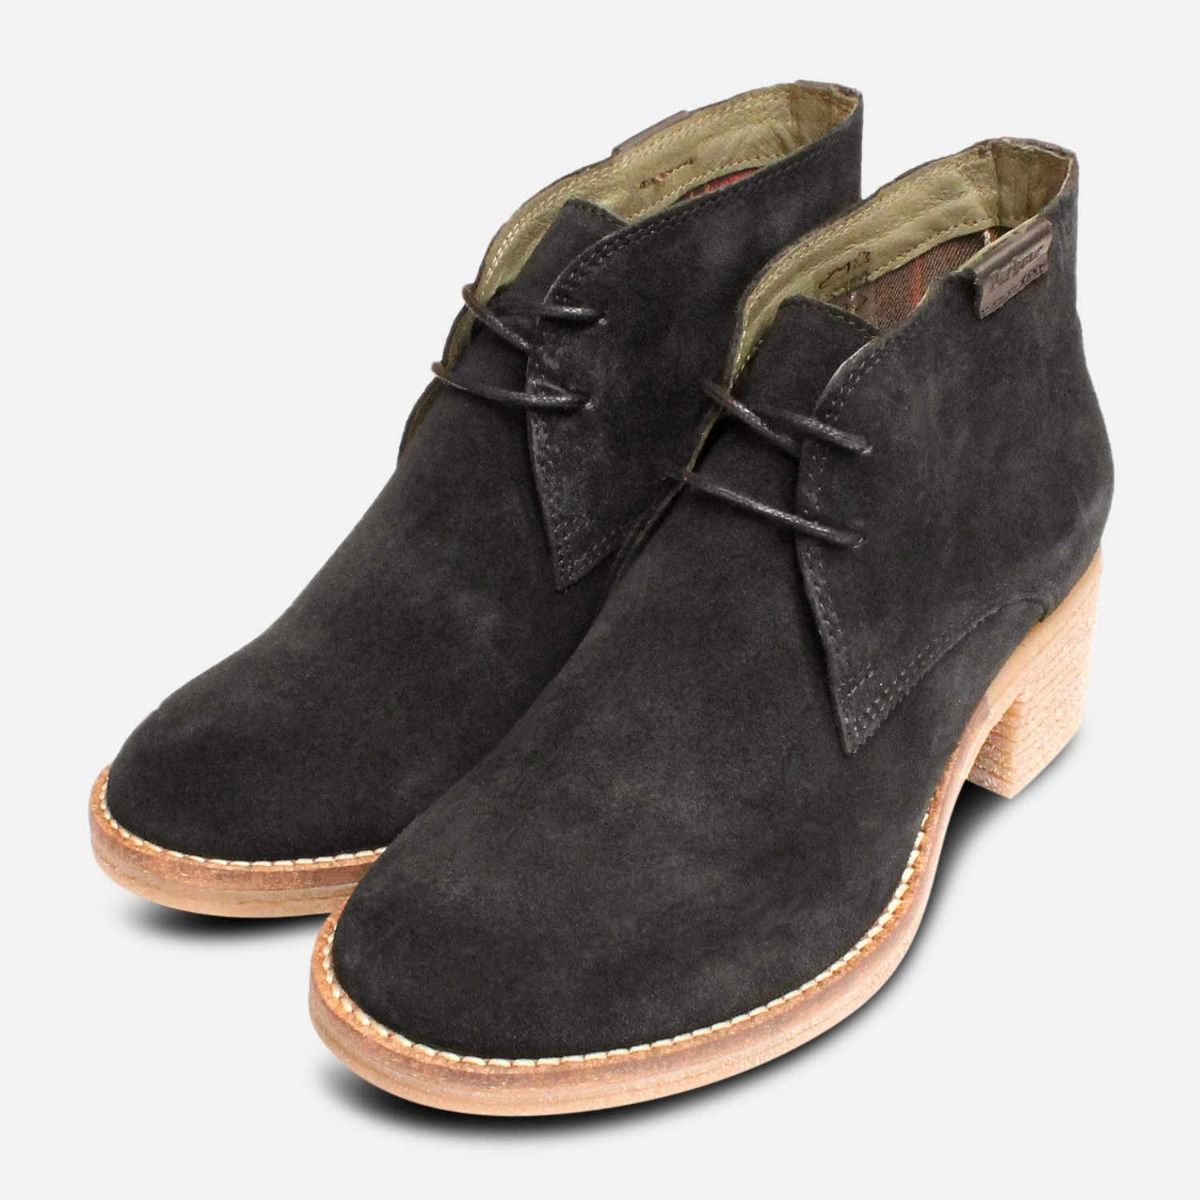 barbour suede shoes